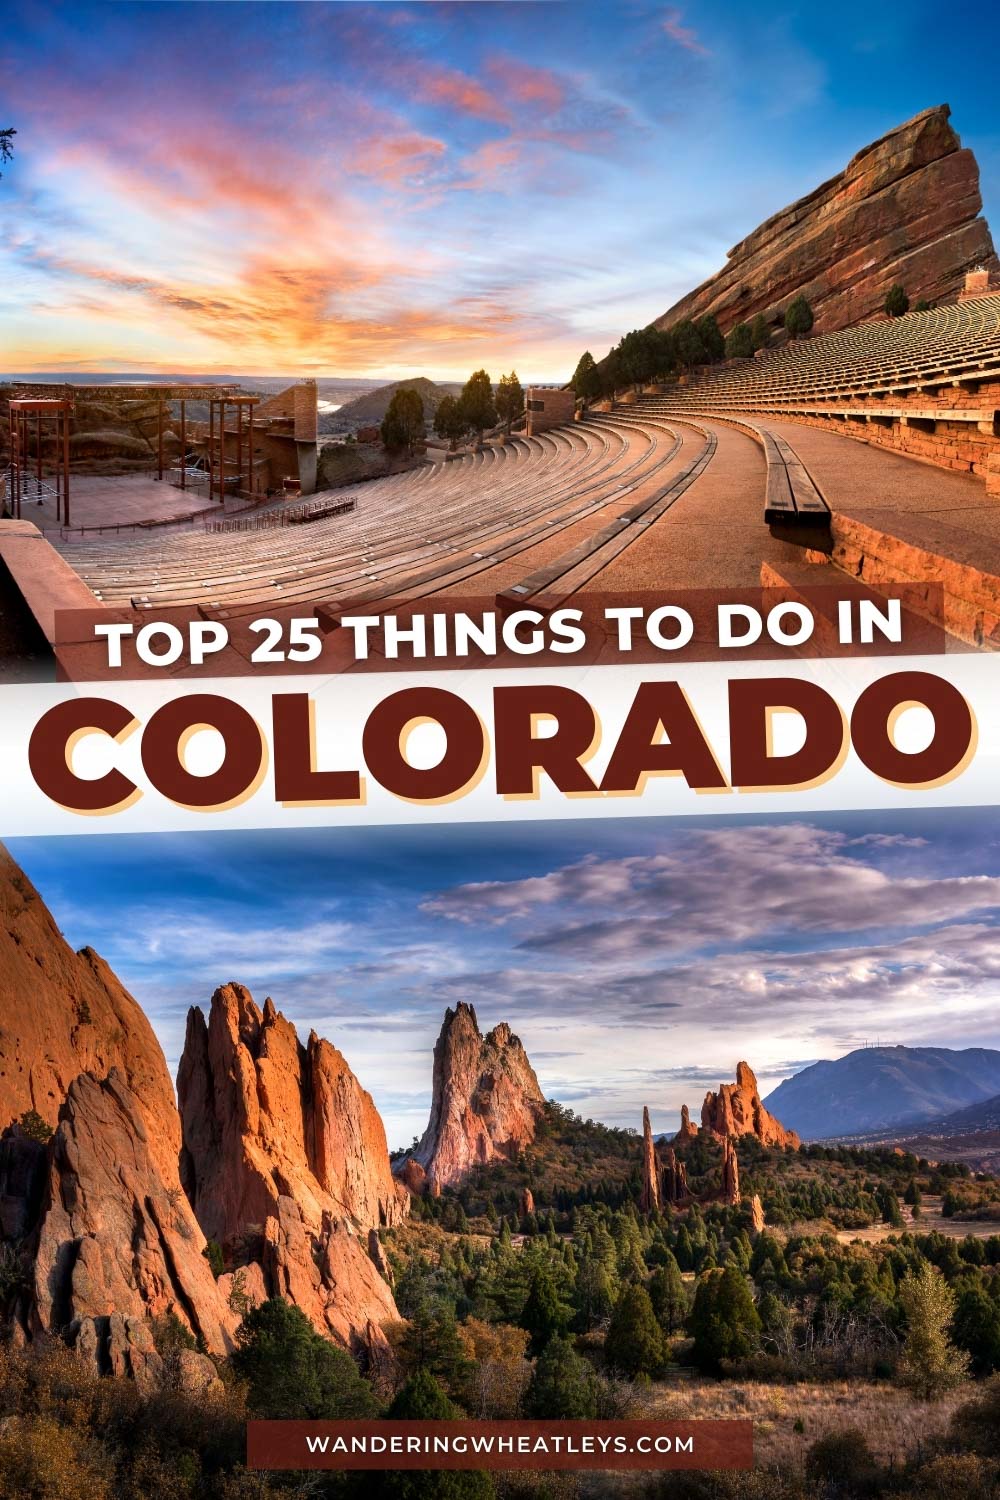 The 25 Best Things To Do in Colorado – Wandering Wheatleys